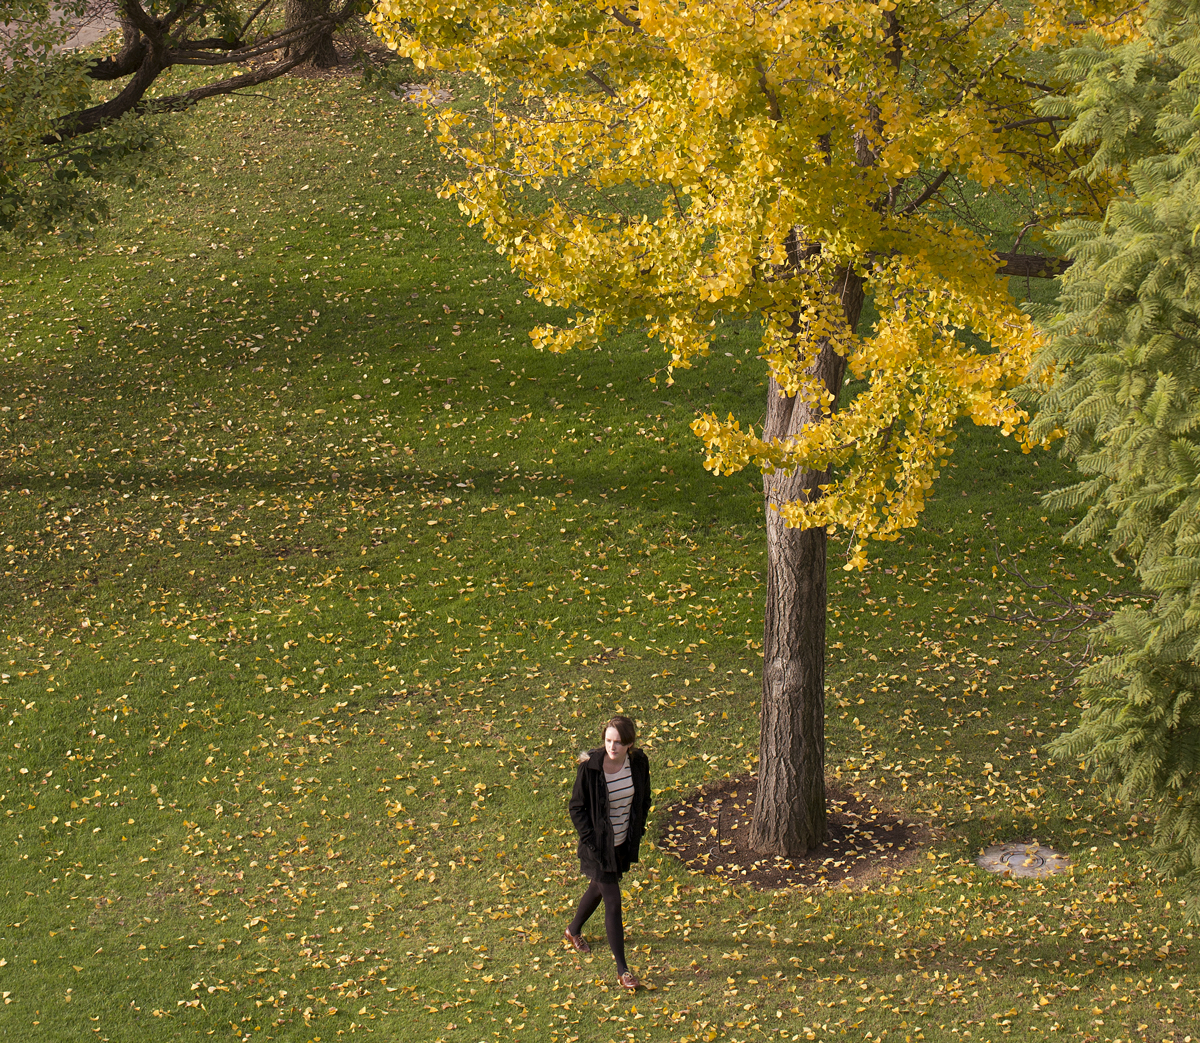 Student Zoe Lance walks amid fallen leaves at CPP, 2012